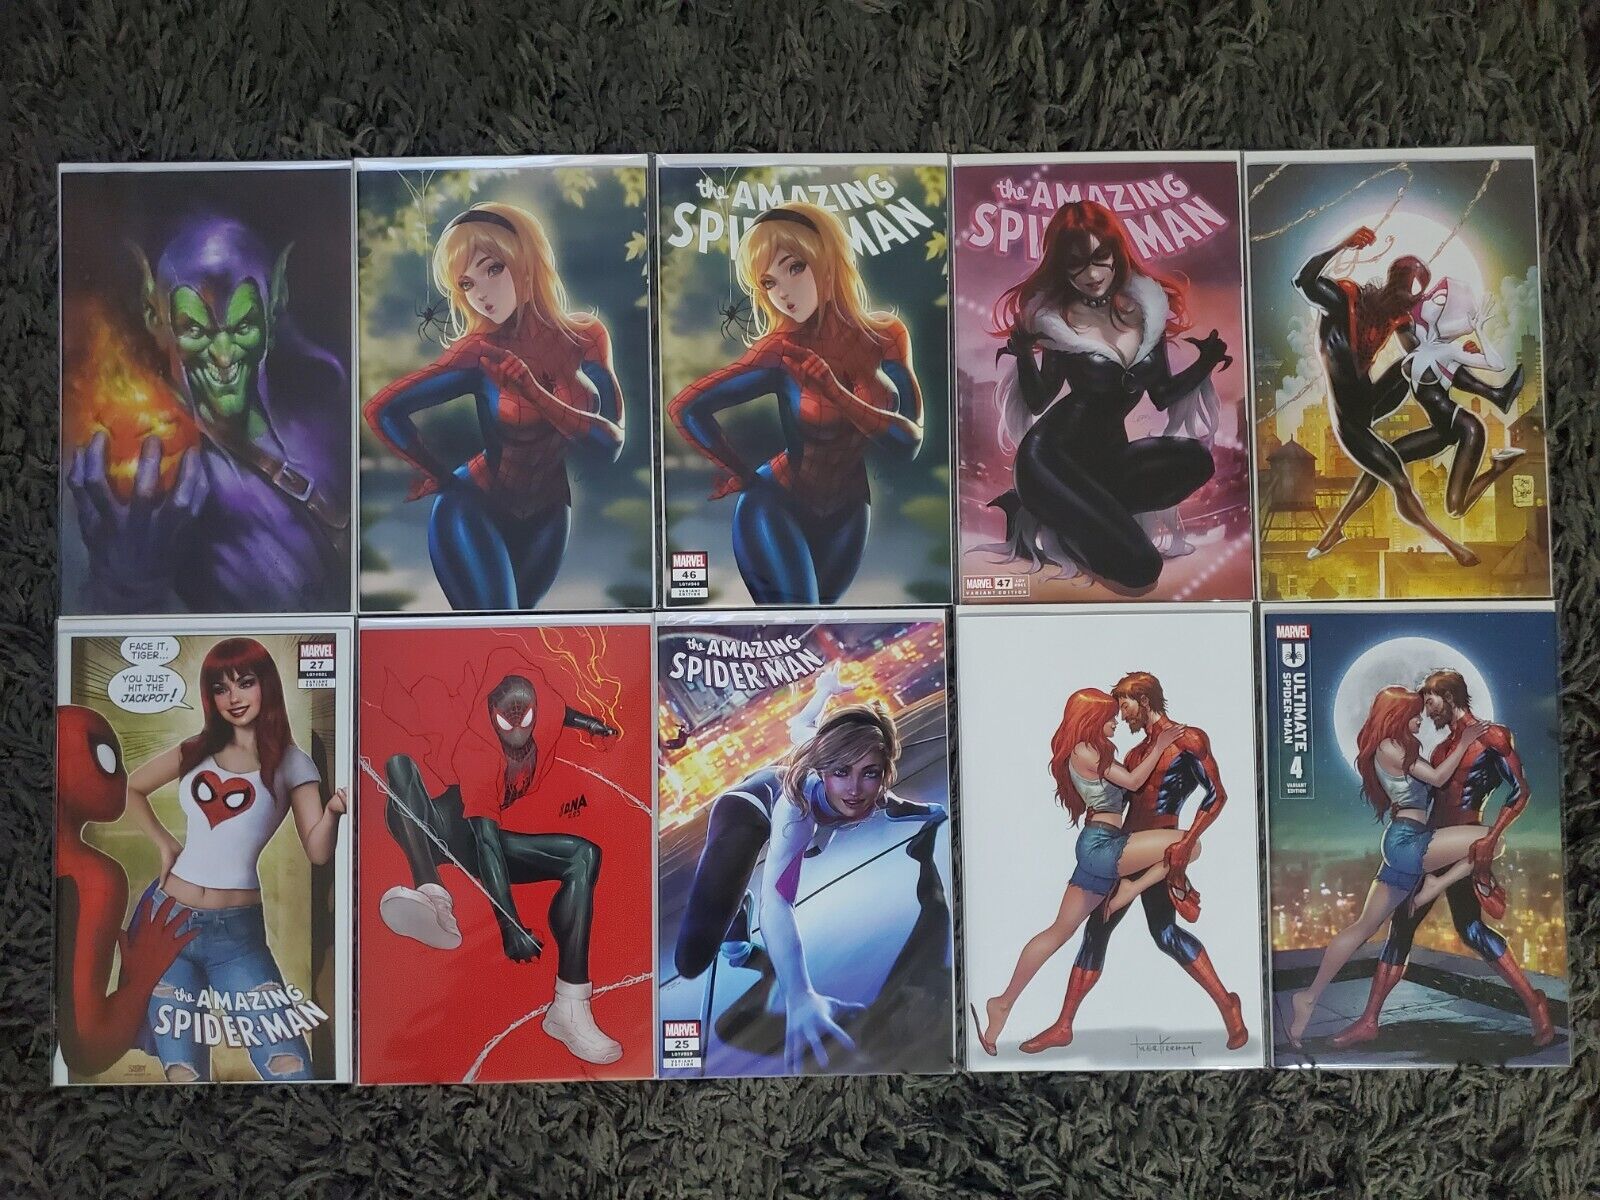 SPIDER-MAN THEMED EXCLUSIVE COVER COMIC BOOK LOT - 10 COMICS NM/NM+ MILES GWEN